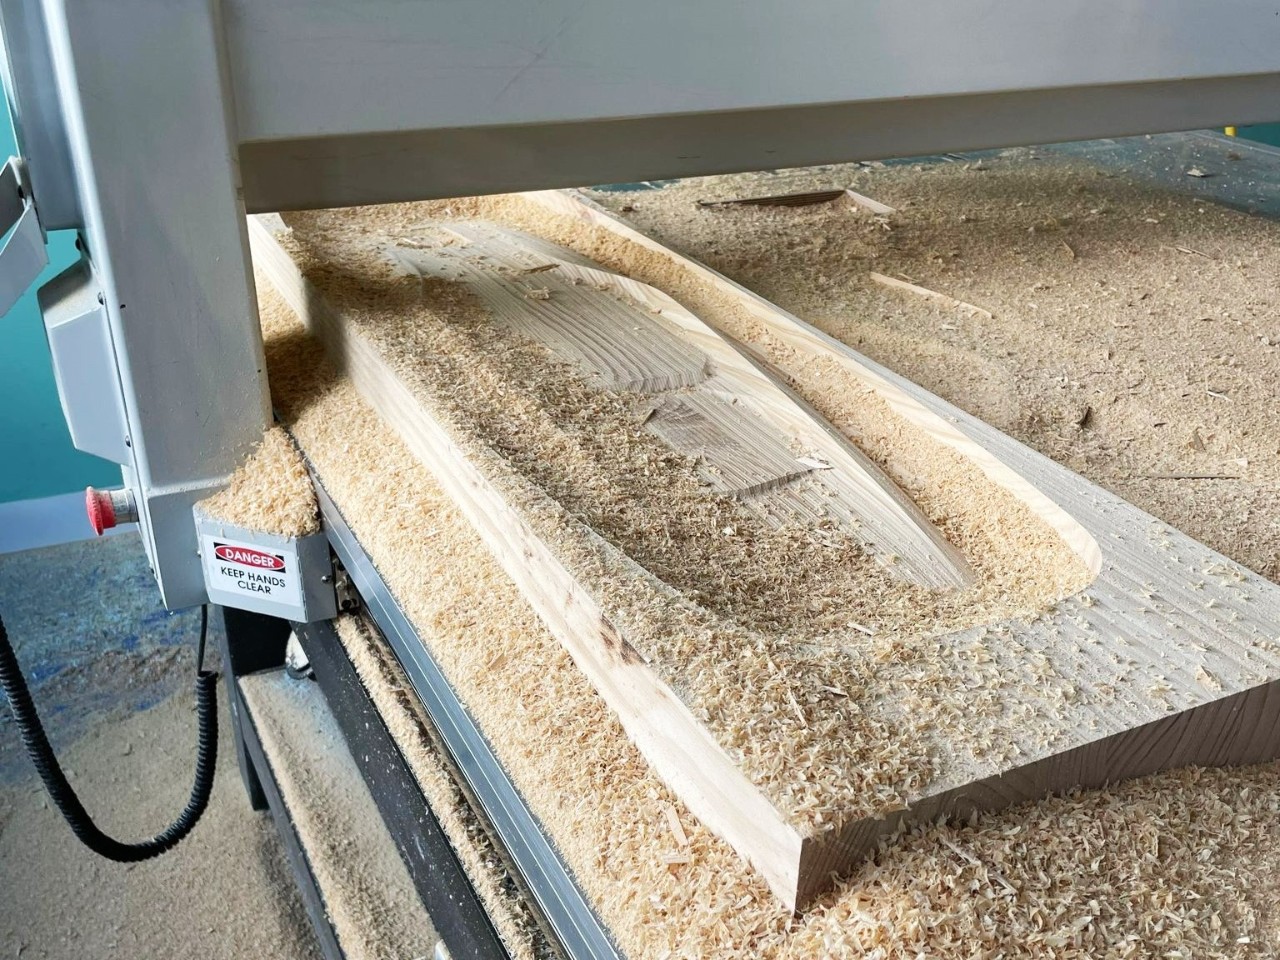 A rectangular wooden piece sits in an industrial machine with a shape cut out of it, surrounded by sawdust